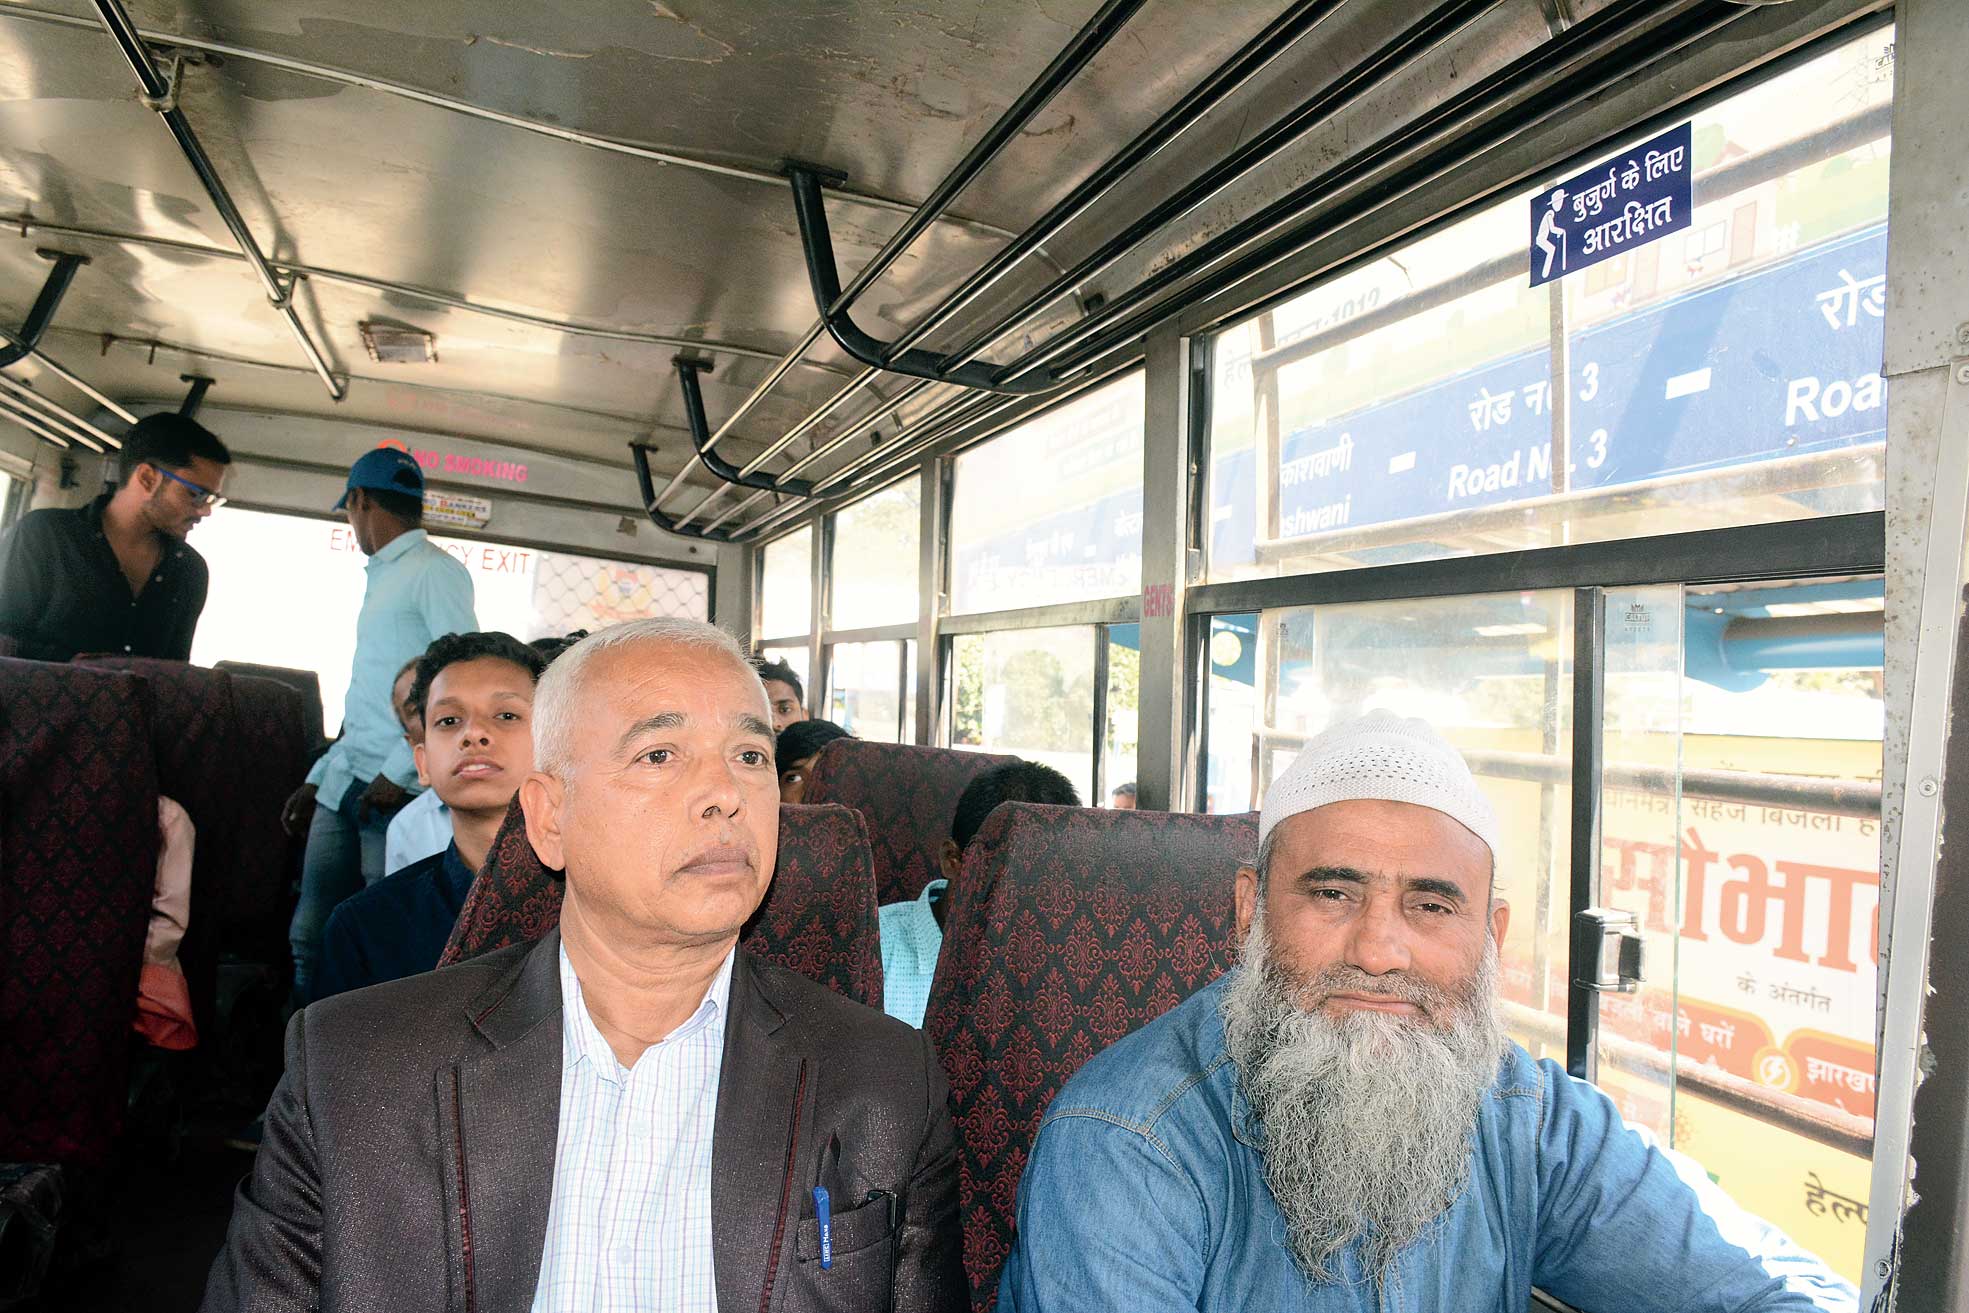 Elderly passengers ride a town bus in Sakchi, Jamshedpur, on Tuesday. 
